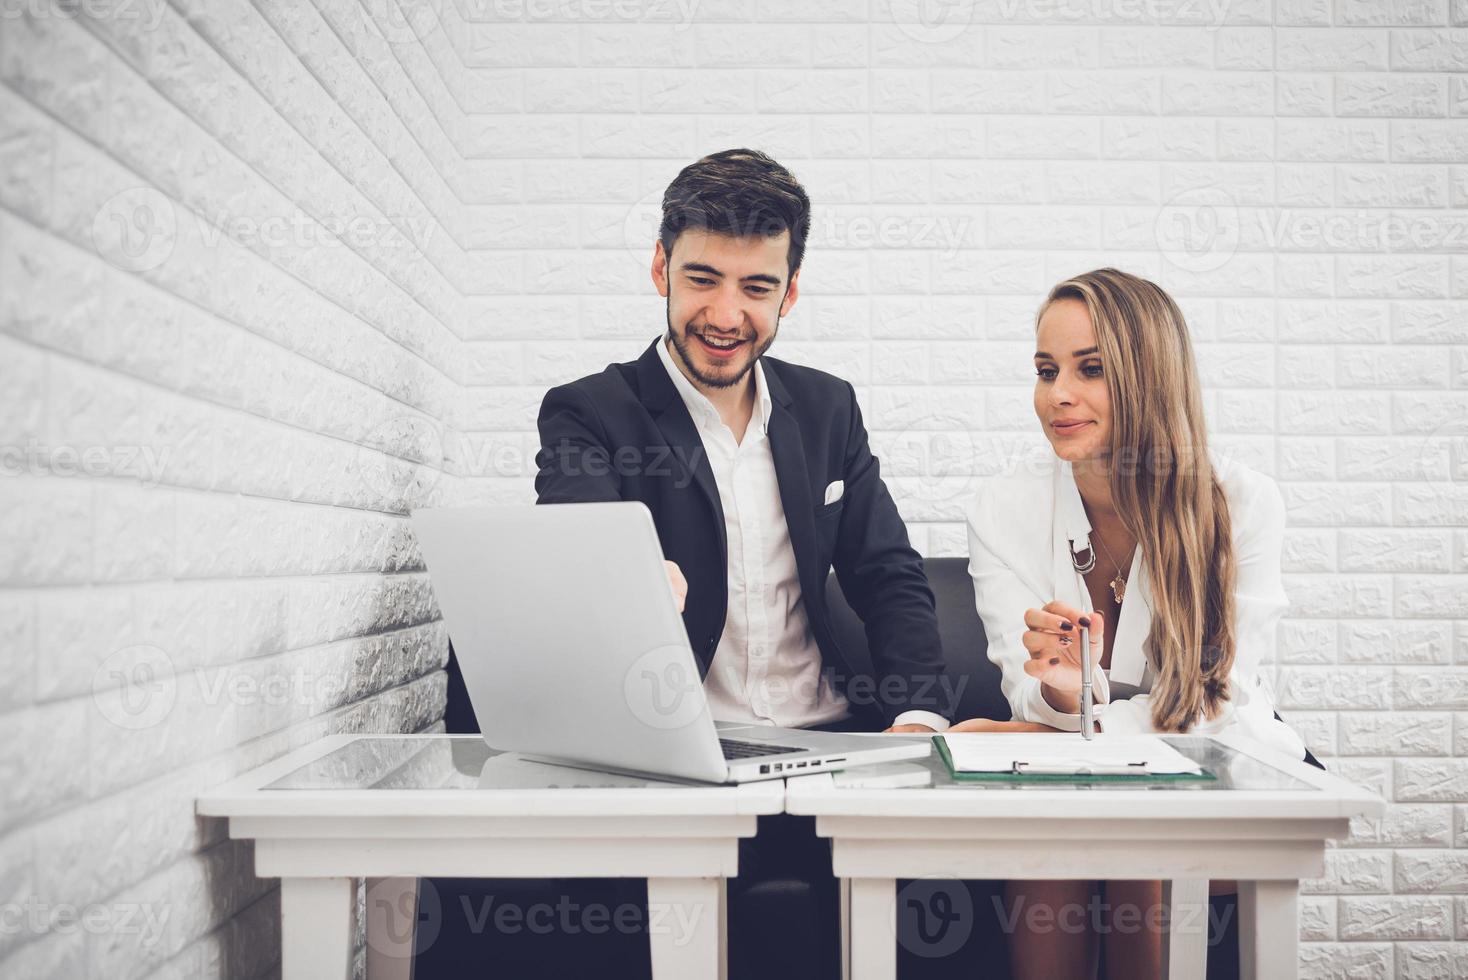 Businessman and business woman analyzing income charts and graphs in coffee shop. Business analysis and strategy concept. Indoors office theme photo